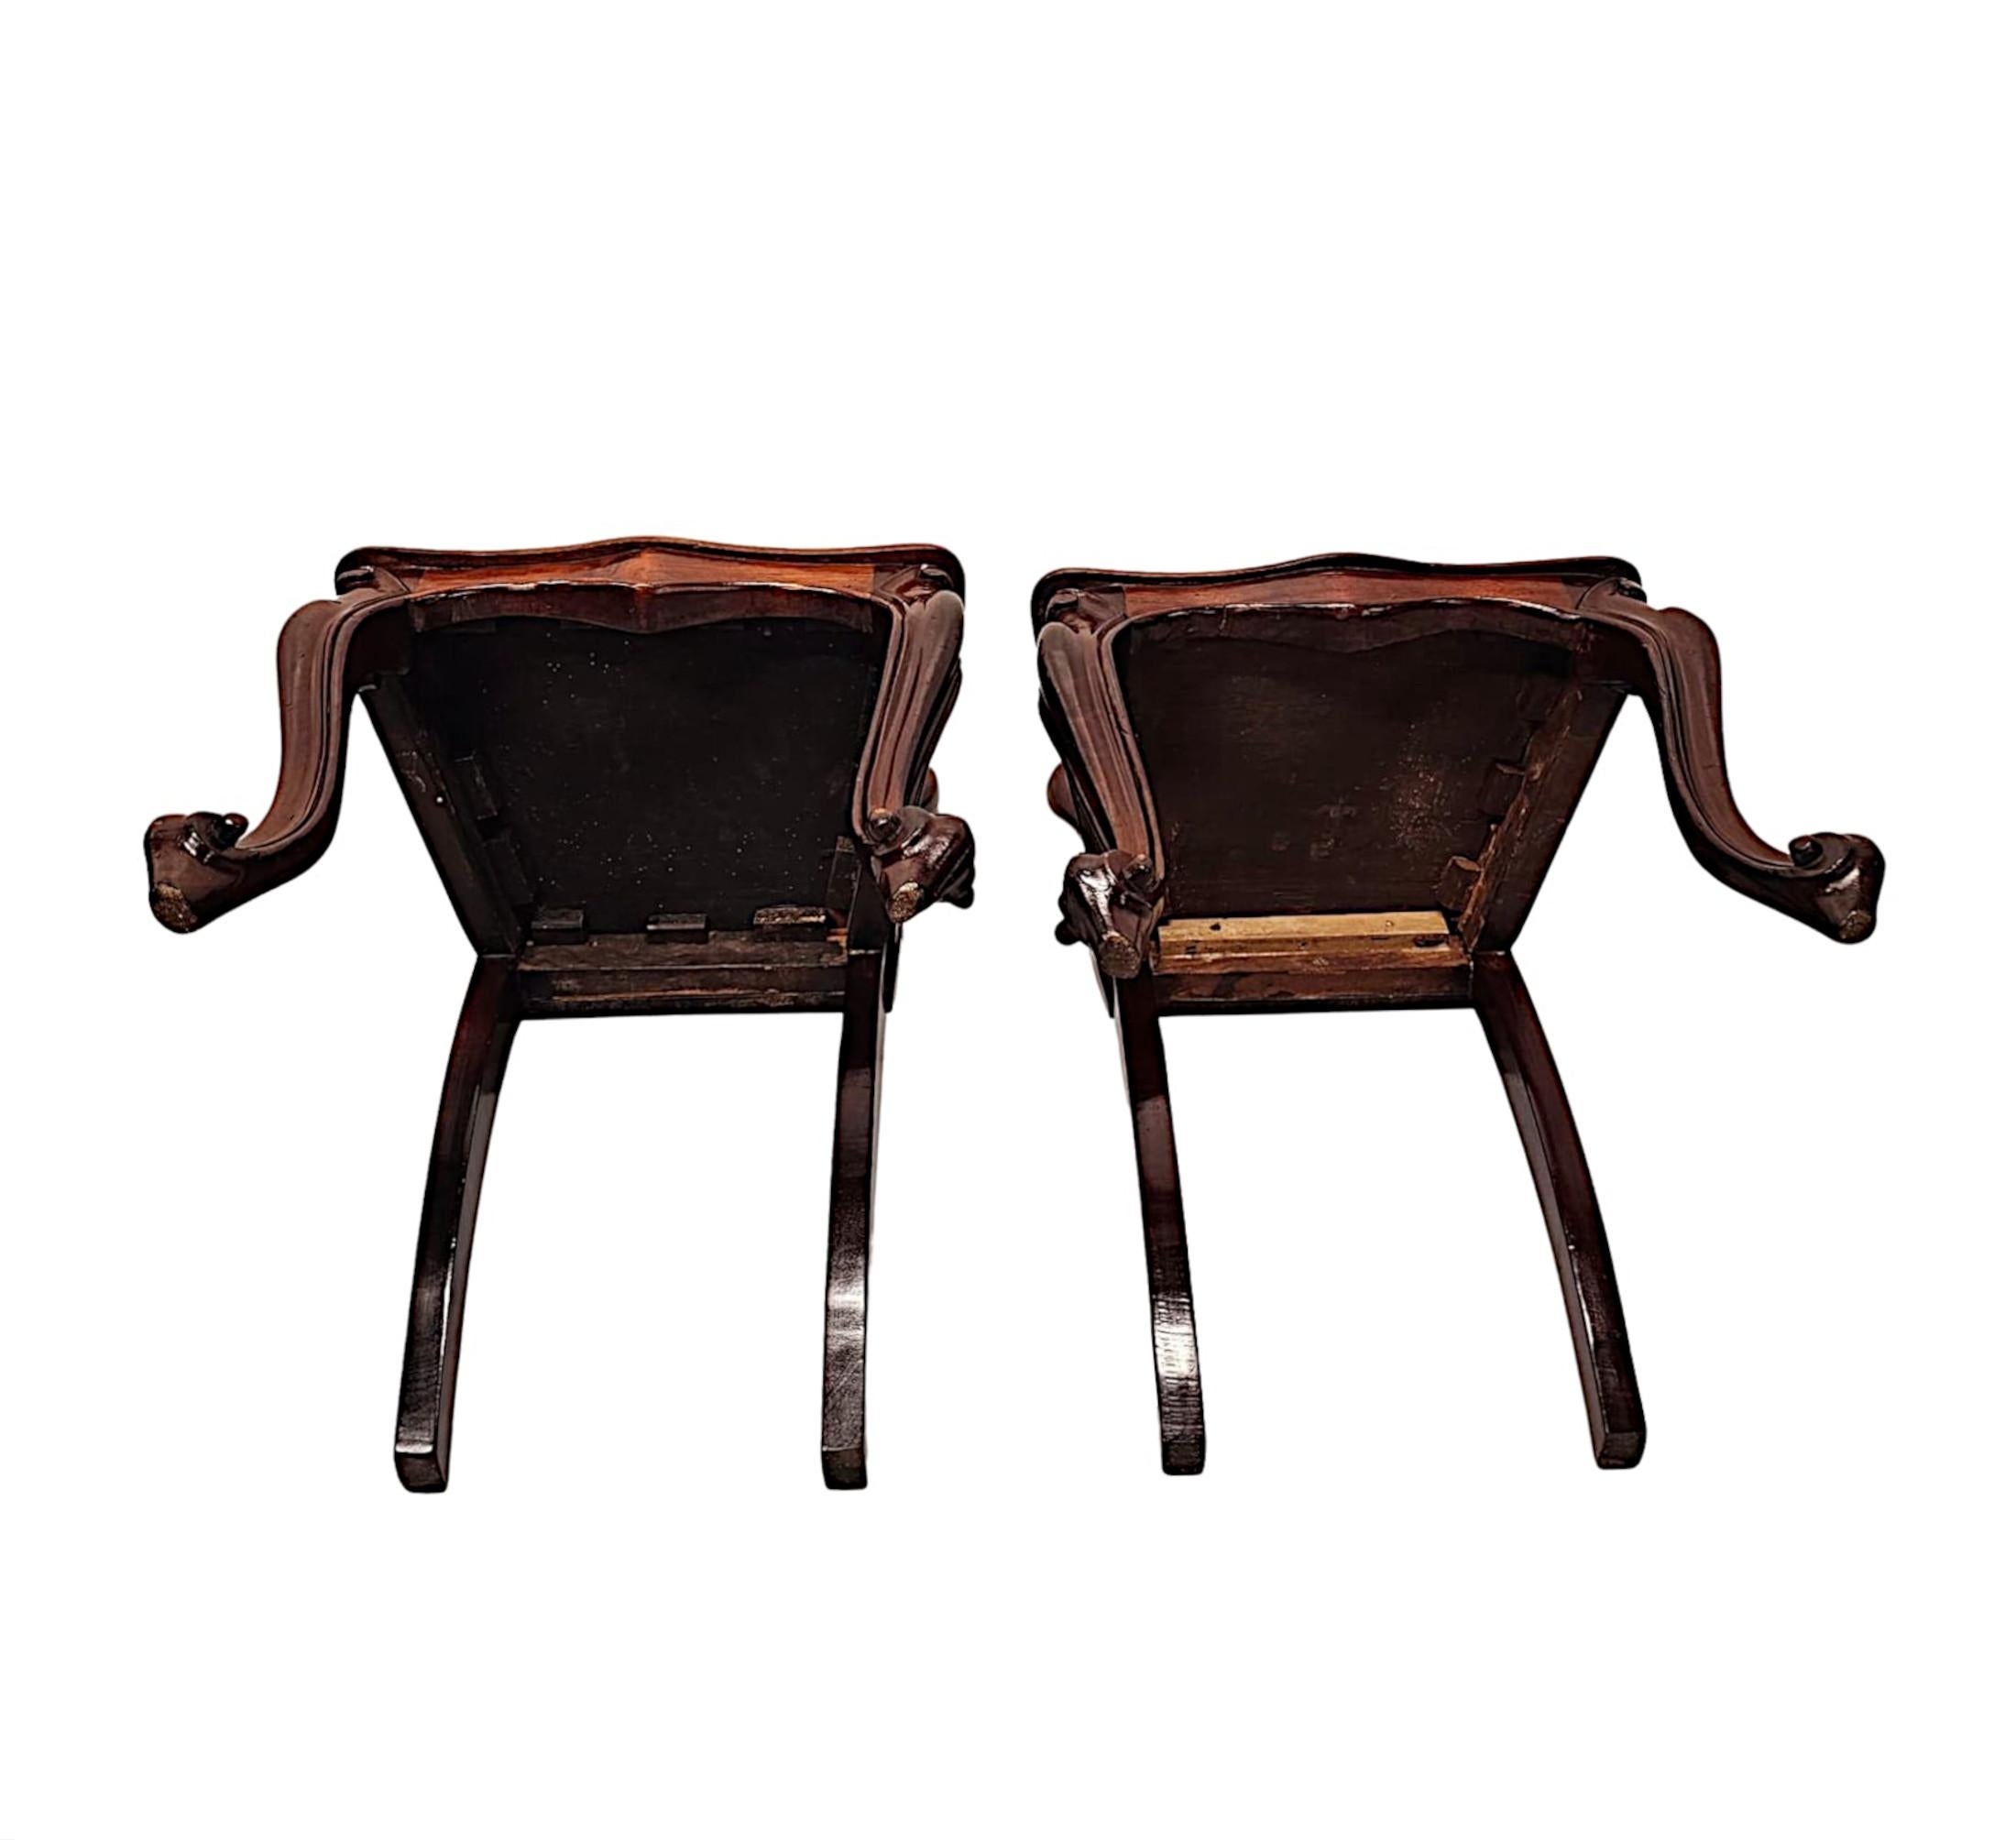 Mahogany A Stunning Pair of 19th Century Hall Chairs For Sale